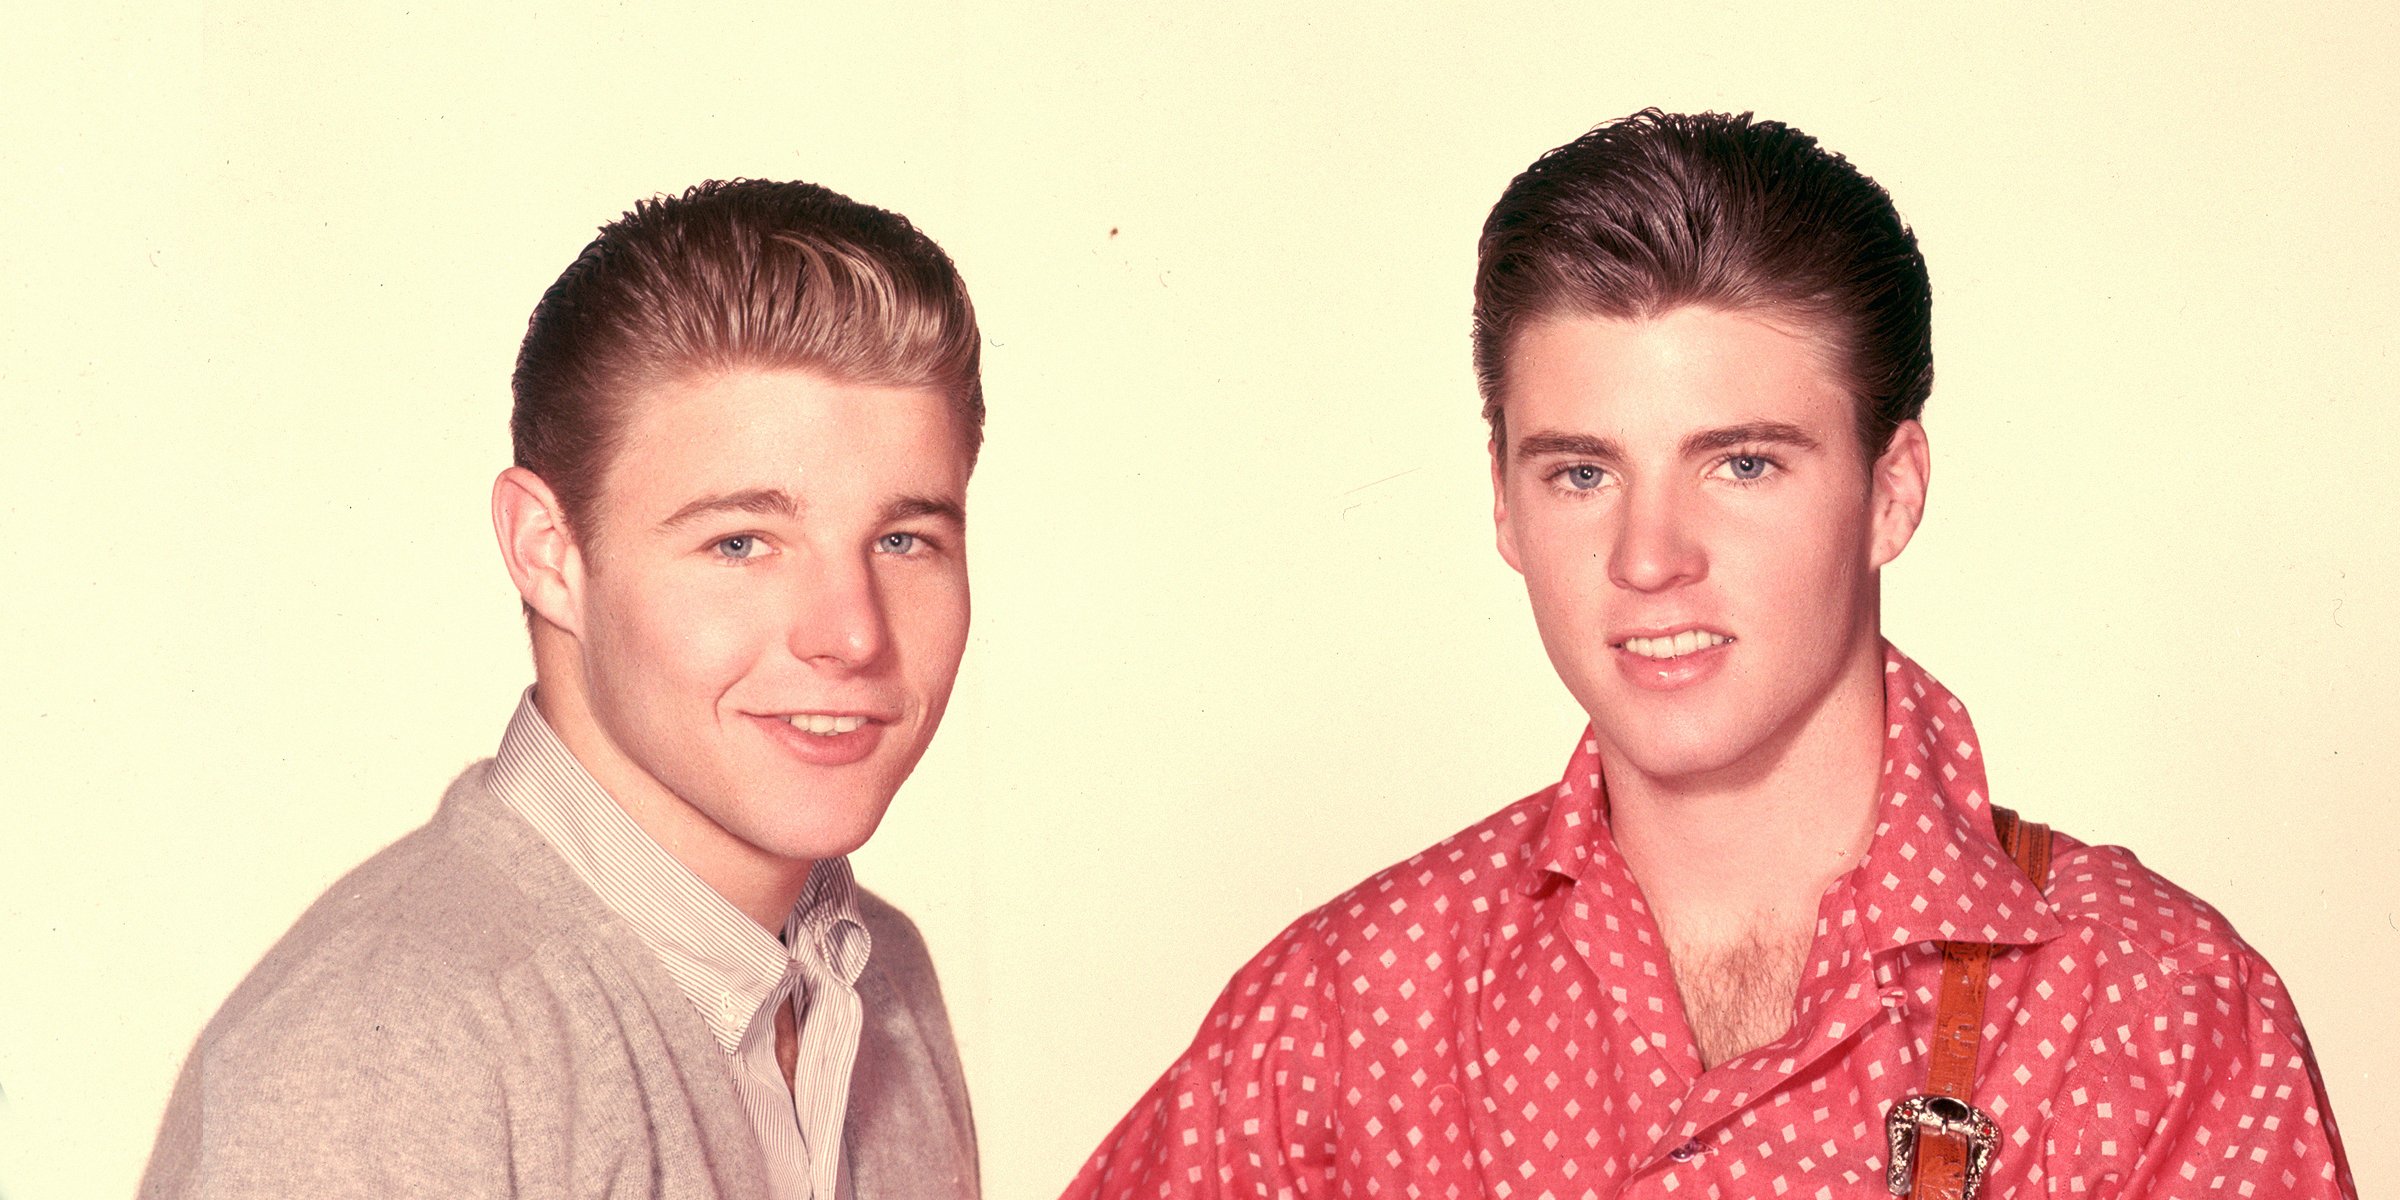 David and Ricky Nelson | Source: Getty Images